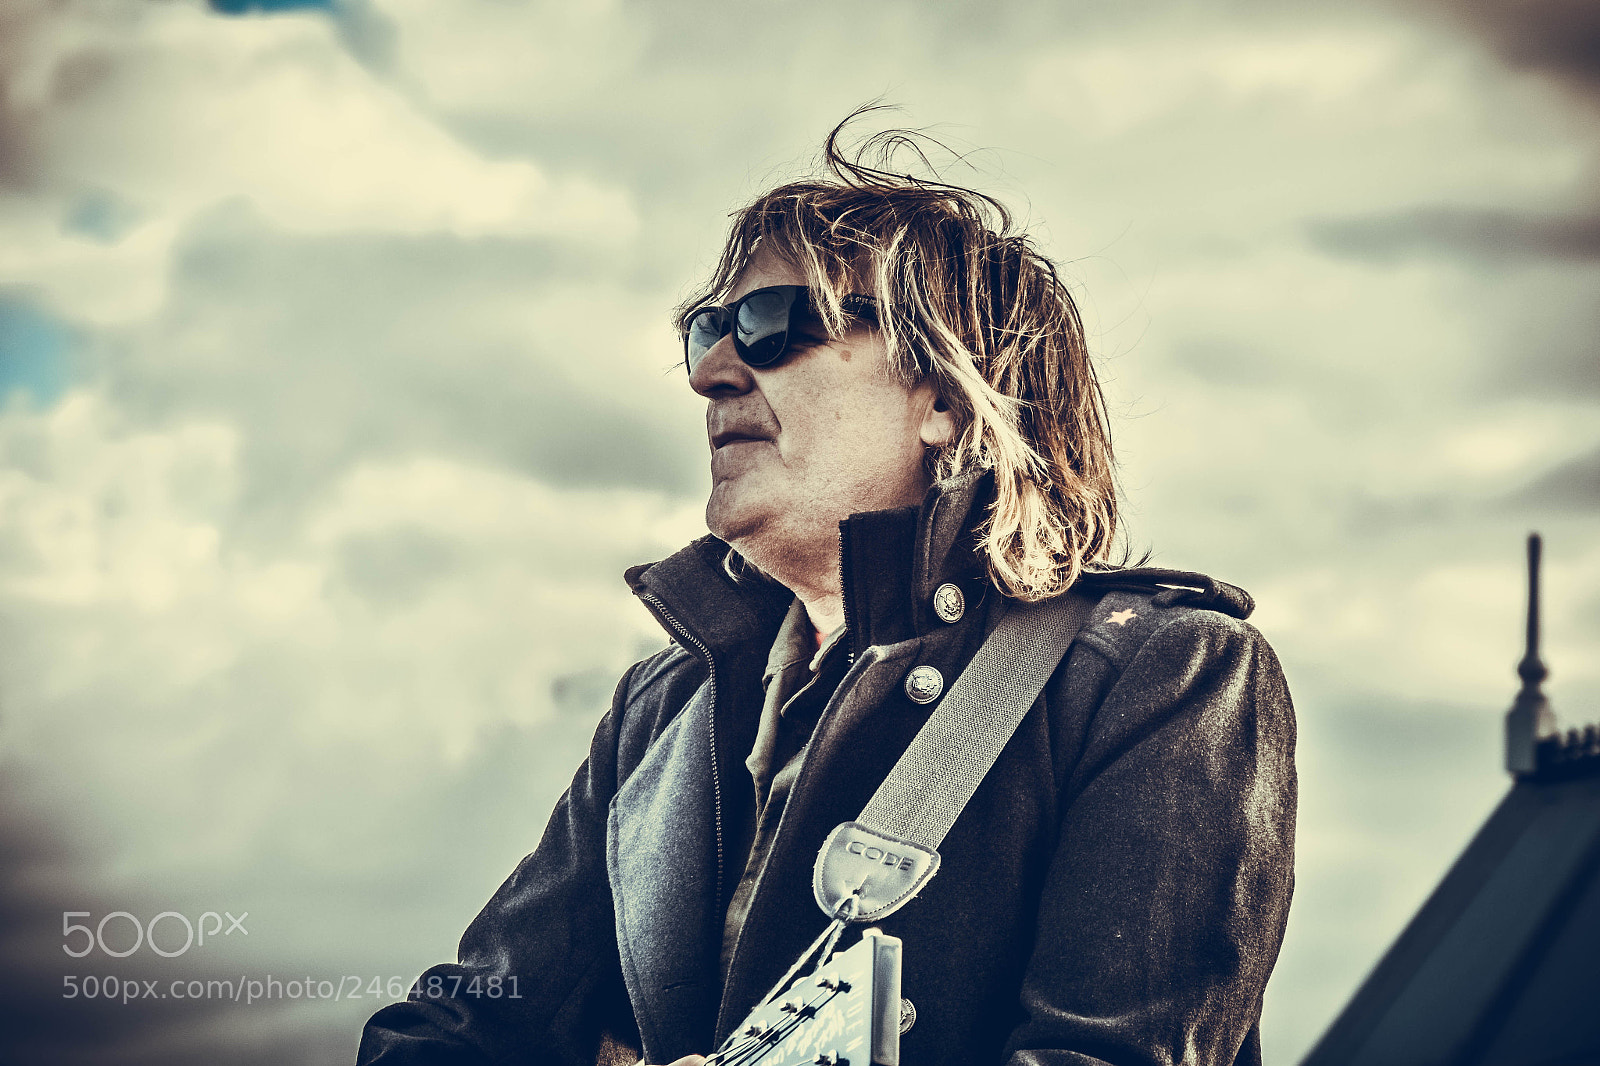 Nikon D7200 sample photo. Mike peters - the photography